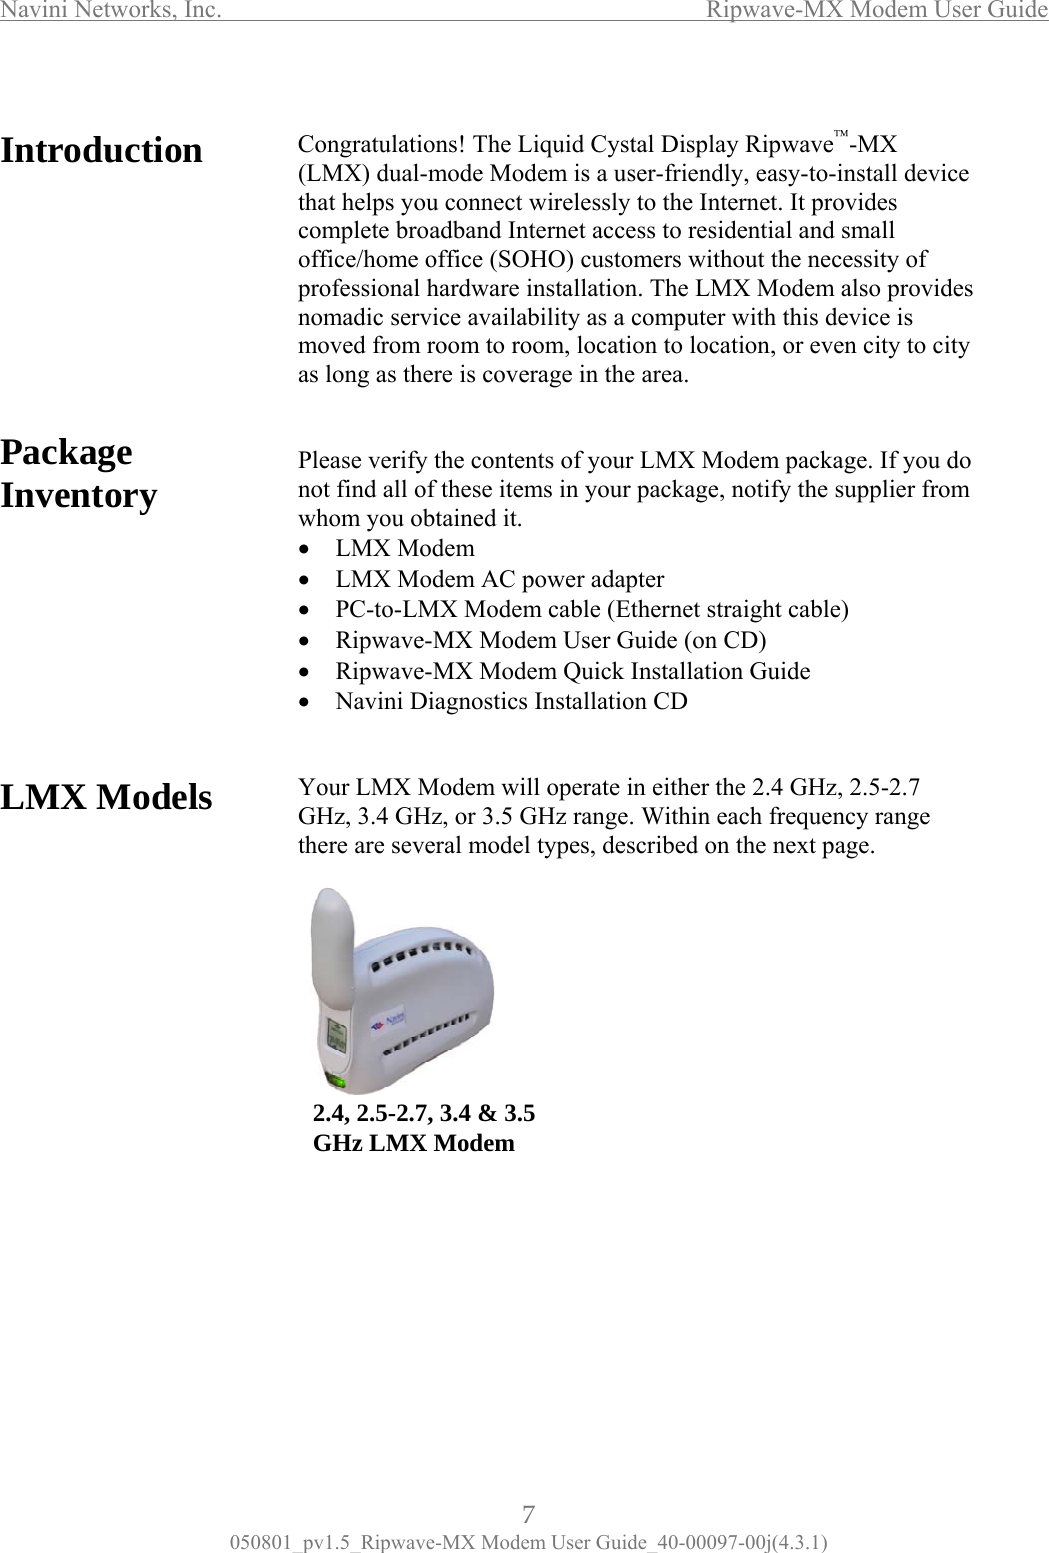 Navini Networks, Inc.                  Ripwave-MX Modem User Guide  Introduction  Con(LM     nomadic service availability as a computer with this device is    as long as there is coverage in the area.  Package ventory  Please verify the contents of your LMX Modem package. If you do not find all of these items in your package, notify the supplier froIn M    gratulations! The Liquid Cystal Display Ripwave™-MX X) dual-mode Modem is a user-friendly, easy-to-install device that helps you connect wirelessly to the Internet. It provides complete broadband Internet access to residential and small professional hardware installation. The LMX Modem also provides moved from room to room, location to location, or even city to city   m whom you obtained it. •  LMX Modem •  PC-to-LMX Modem cable (Ethernet straight cable) •  Navini Diagnostics Installation CD X Modem will operate in either the 2.4 GHz, 2.5-2.7 ed on the next page.            •  LMX Modem AC power adapter    •  Ripwave-MX Modem User Guide (on CD) •  Ripwave-MX Modem Quick Installation Guide    X Models   Your LML GHz, 3.4 GHz, or 3.5 GHz range. Within each frequency range there are several model types, describ                  office/home office (SOHO) customers without the necessity of 2.4, 2.5-2.7, 3.4 &amp; 3.5 GHz LMX Modem7 050801_pv1.5_Ripwave-MX Modem User Guide_40-00097-00j(4.3.1) 